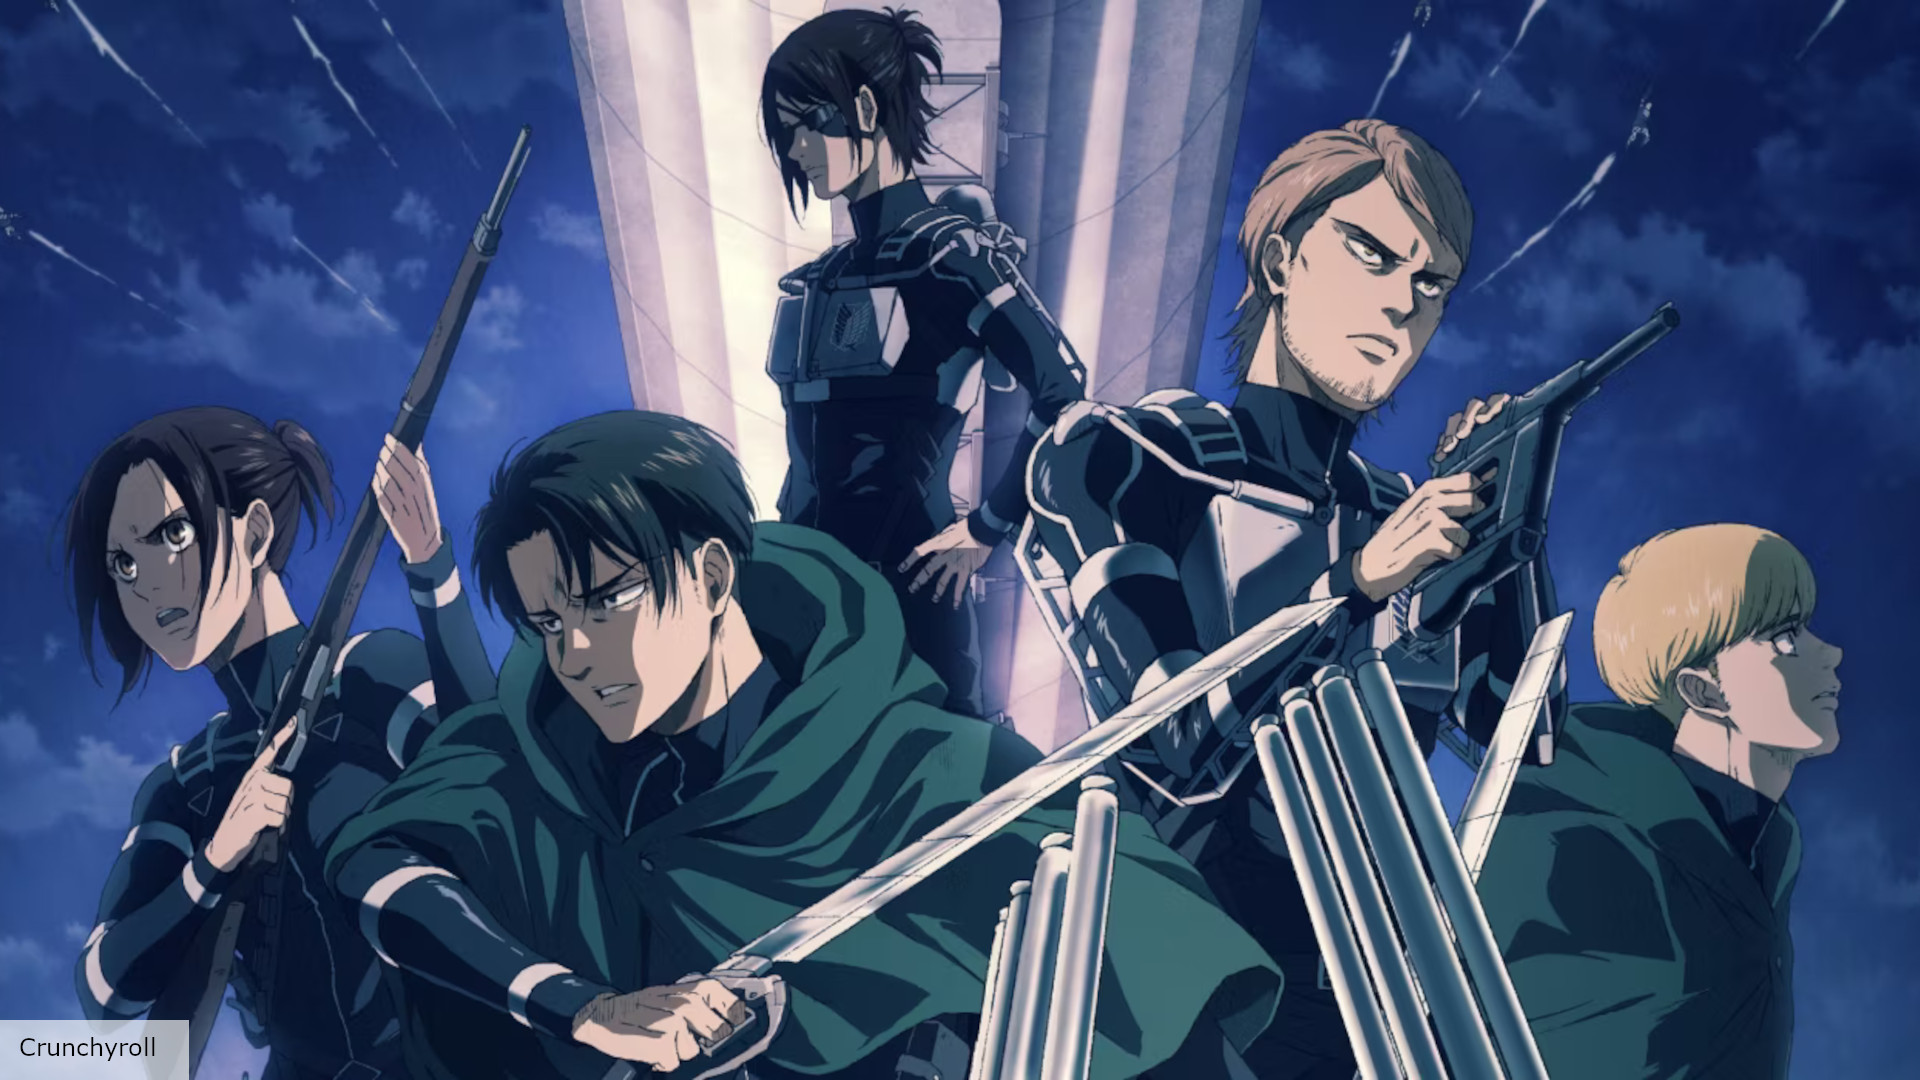 New Attack on Titan poster spoils anime series ending | The Digital Fix